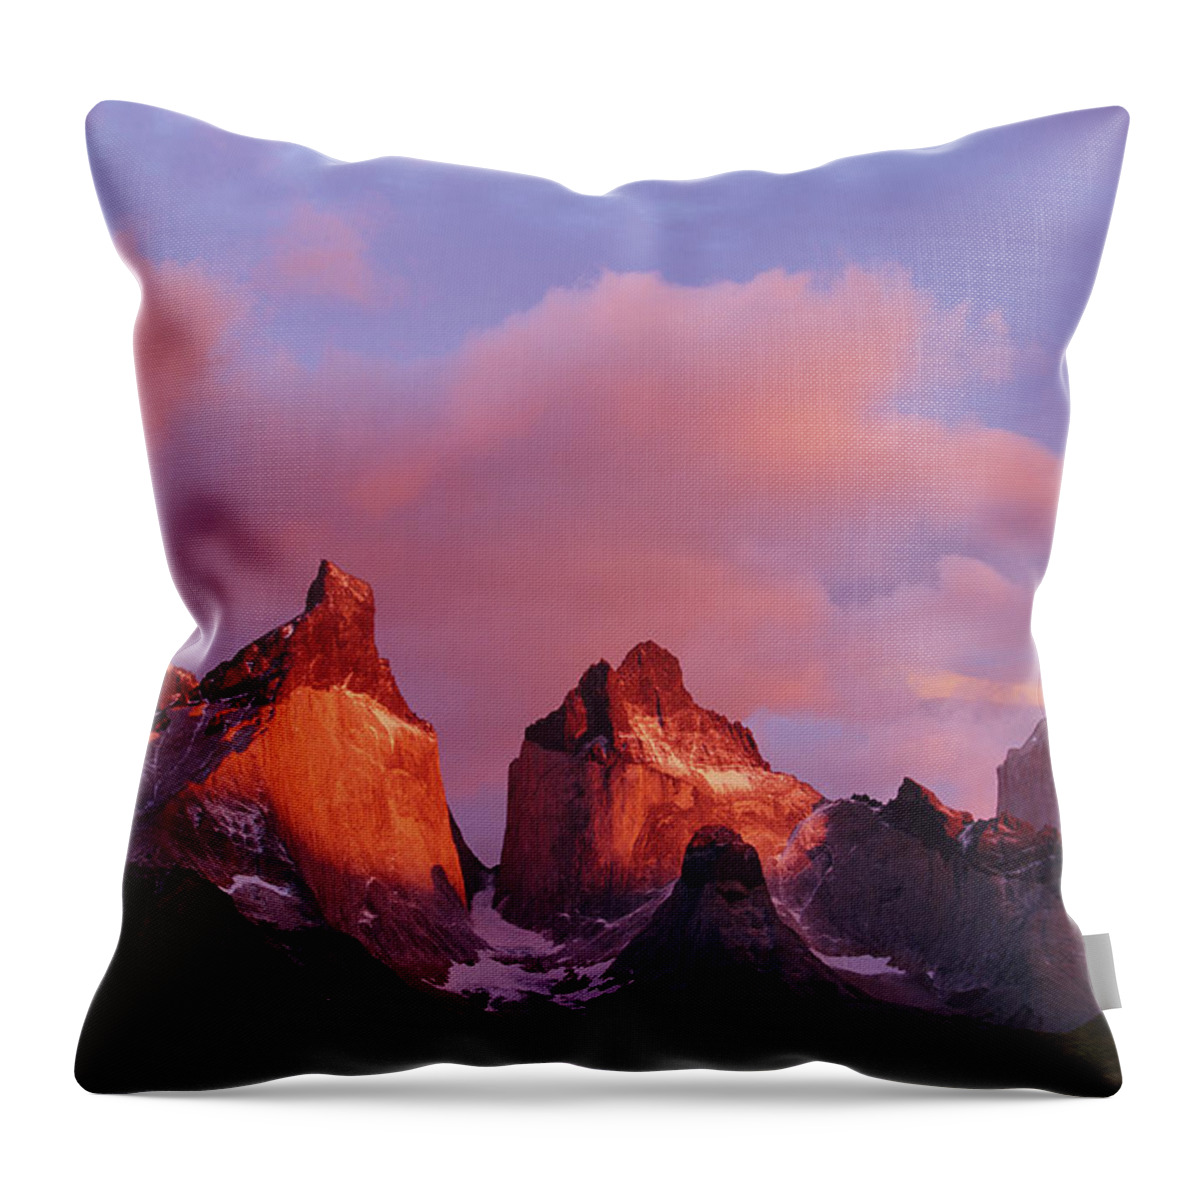 Scenics Throw Pillow featuring the photograph Chile, Torres Del Paine National Park by Paul Souders